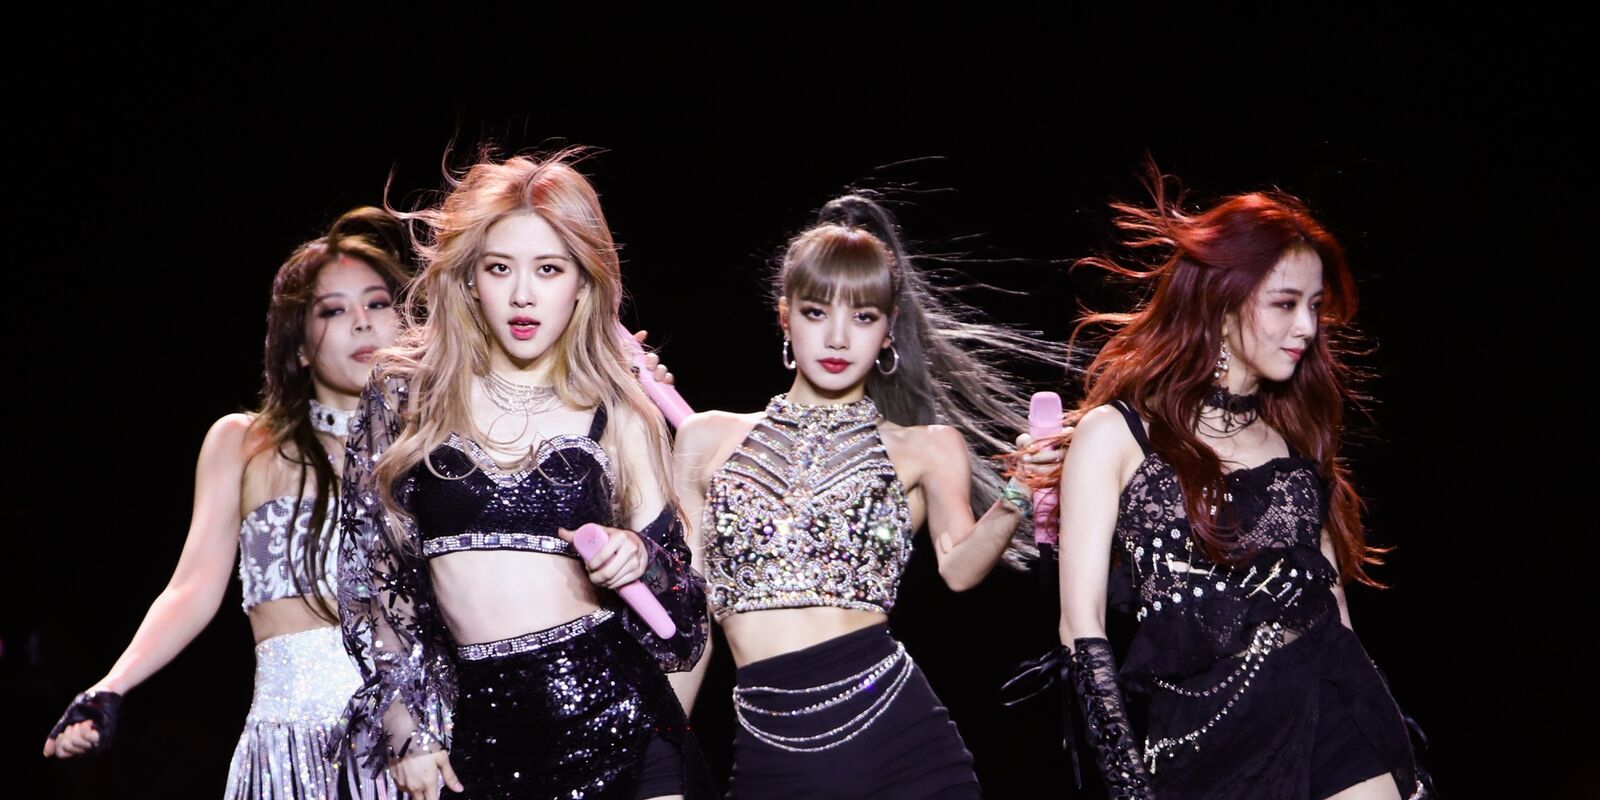 BLACKPINK claims the highest-grossing vocal group title in history